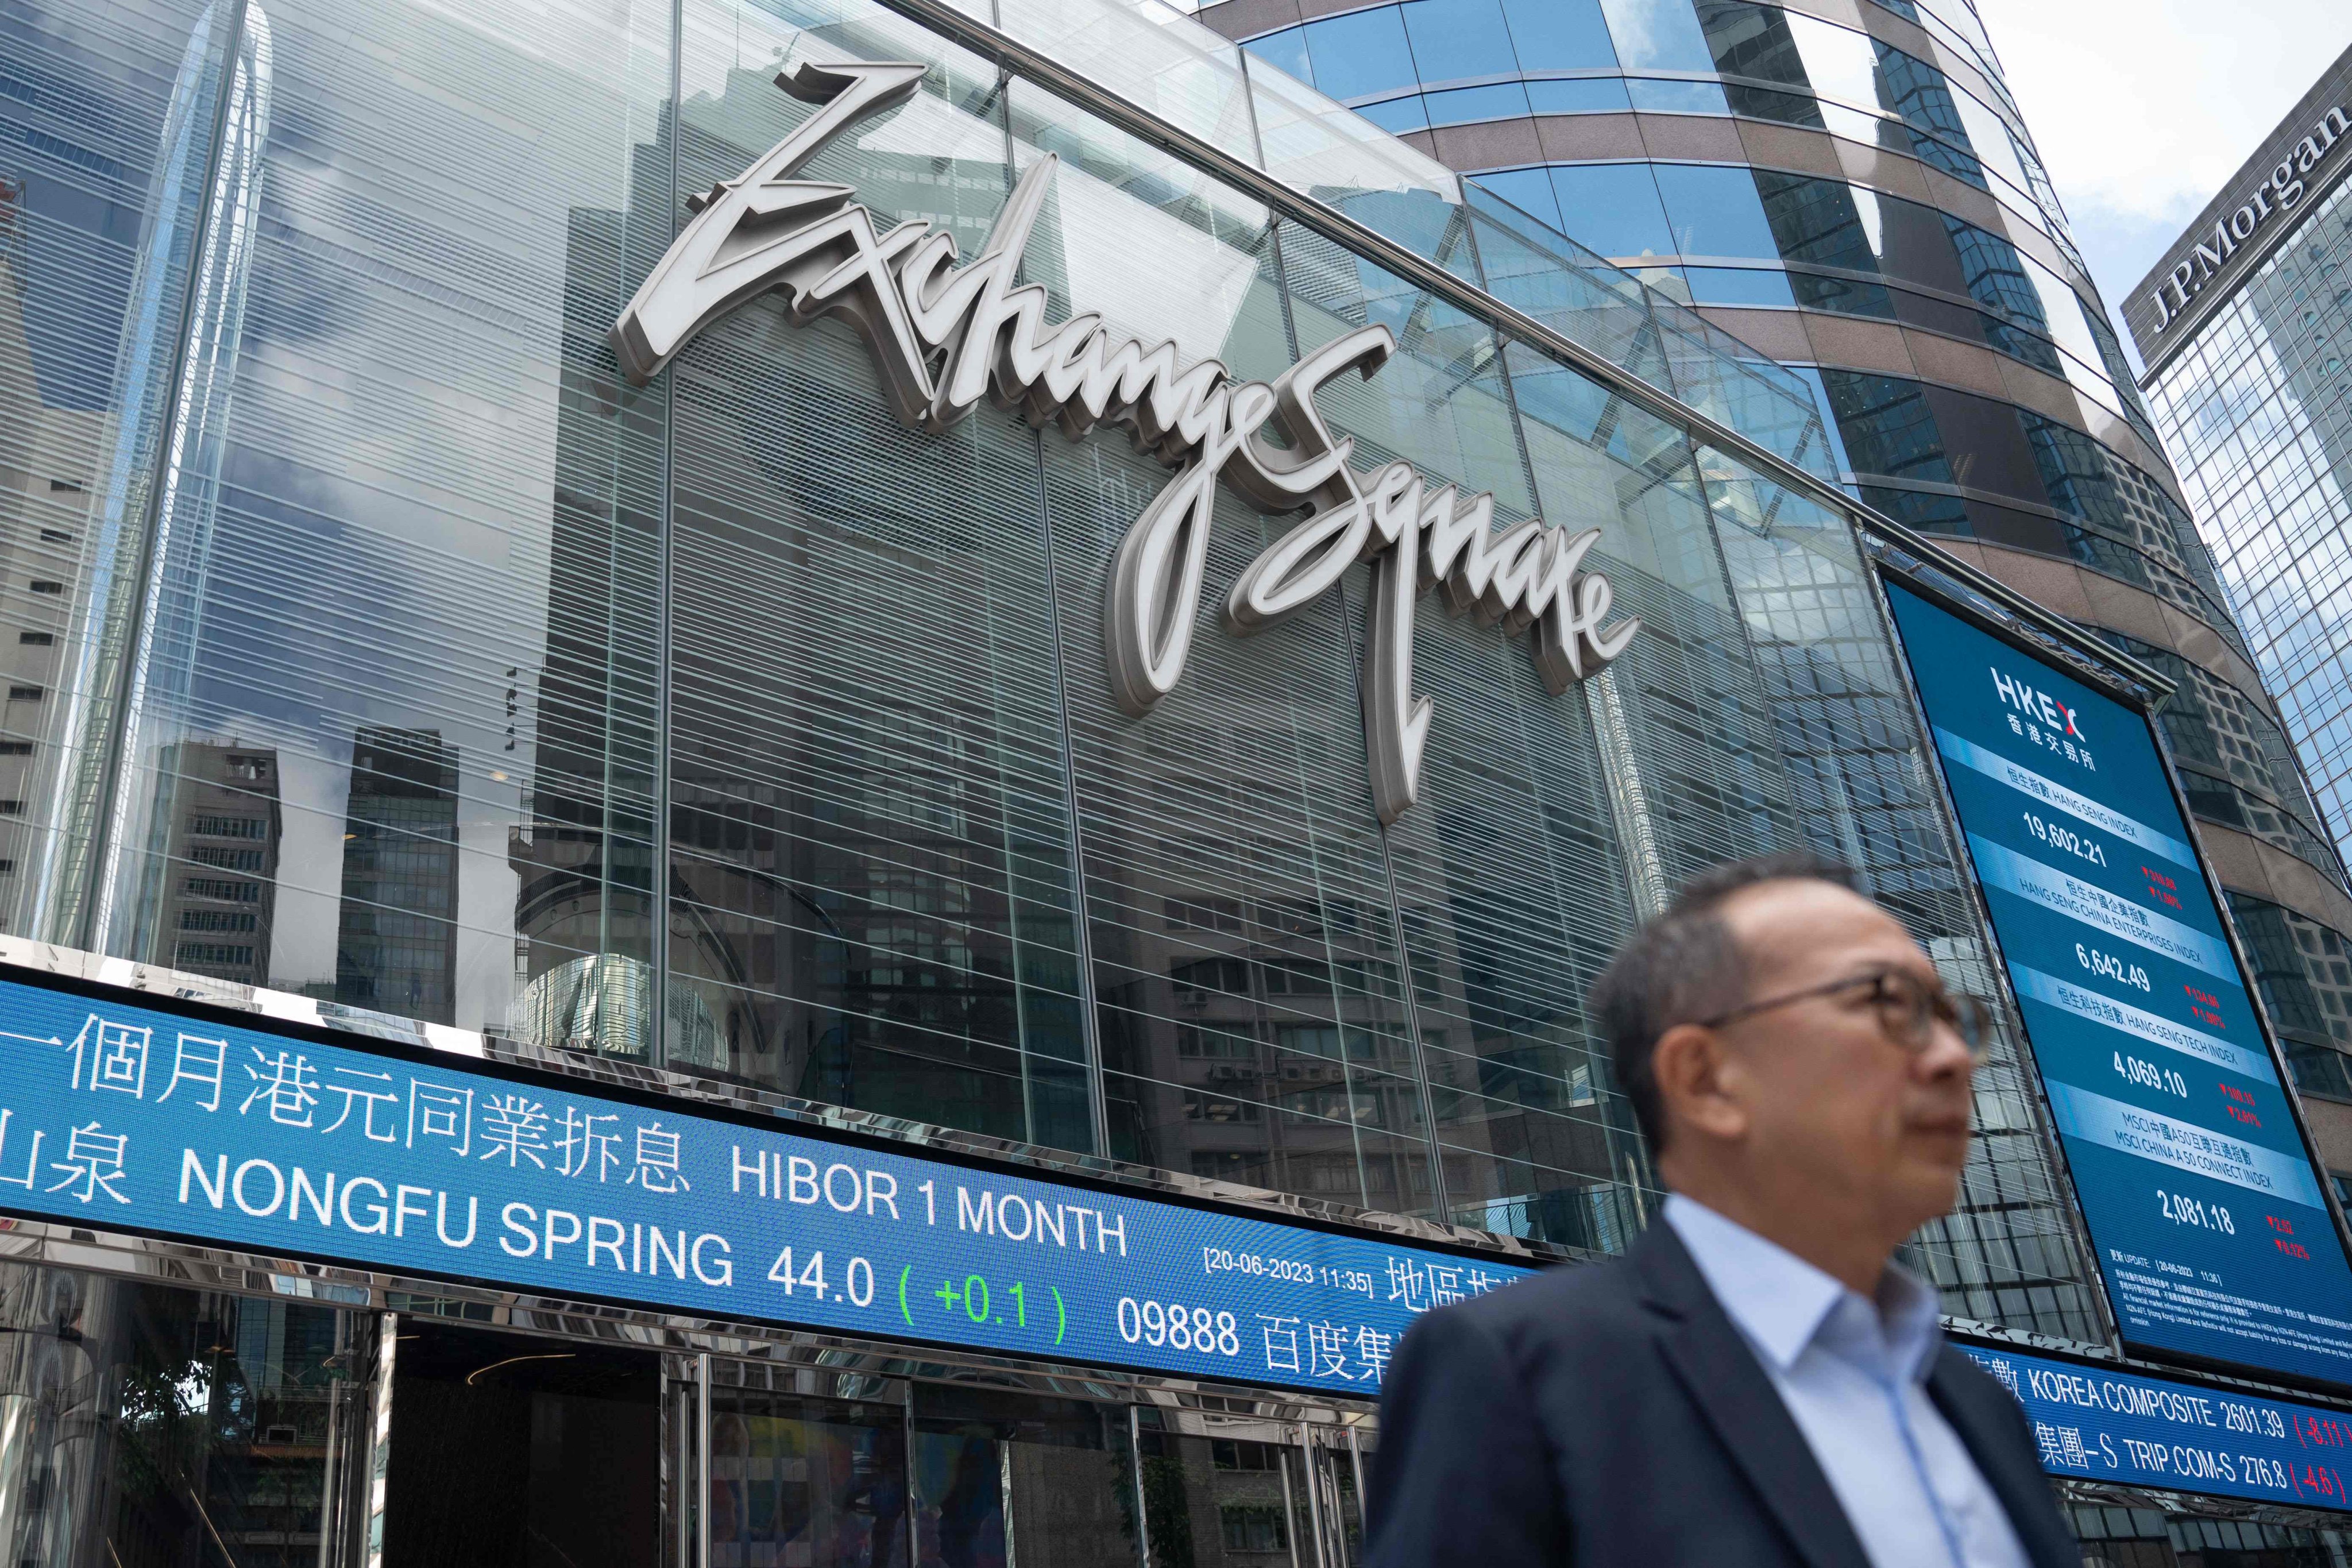 A man walks past an electronic sign showing stocks at Exchange Square in Hong Kong on June 20. Photo: AFP